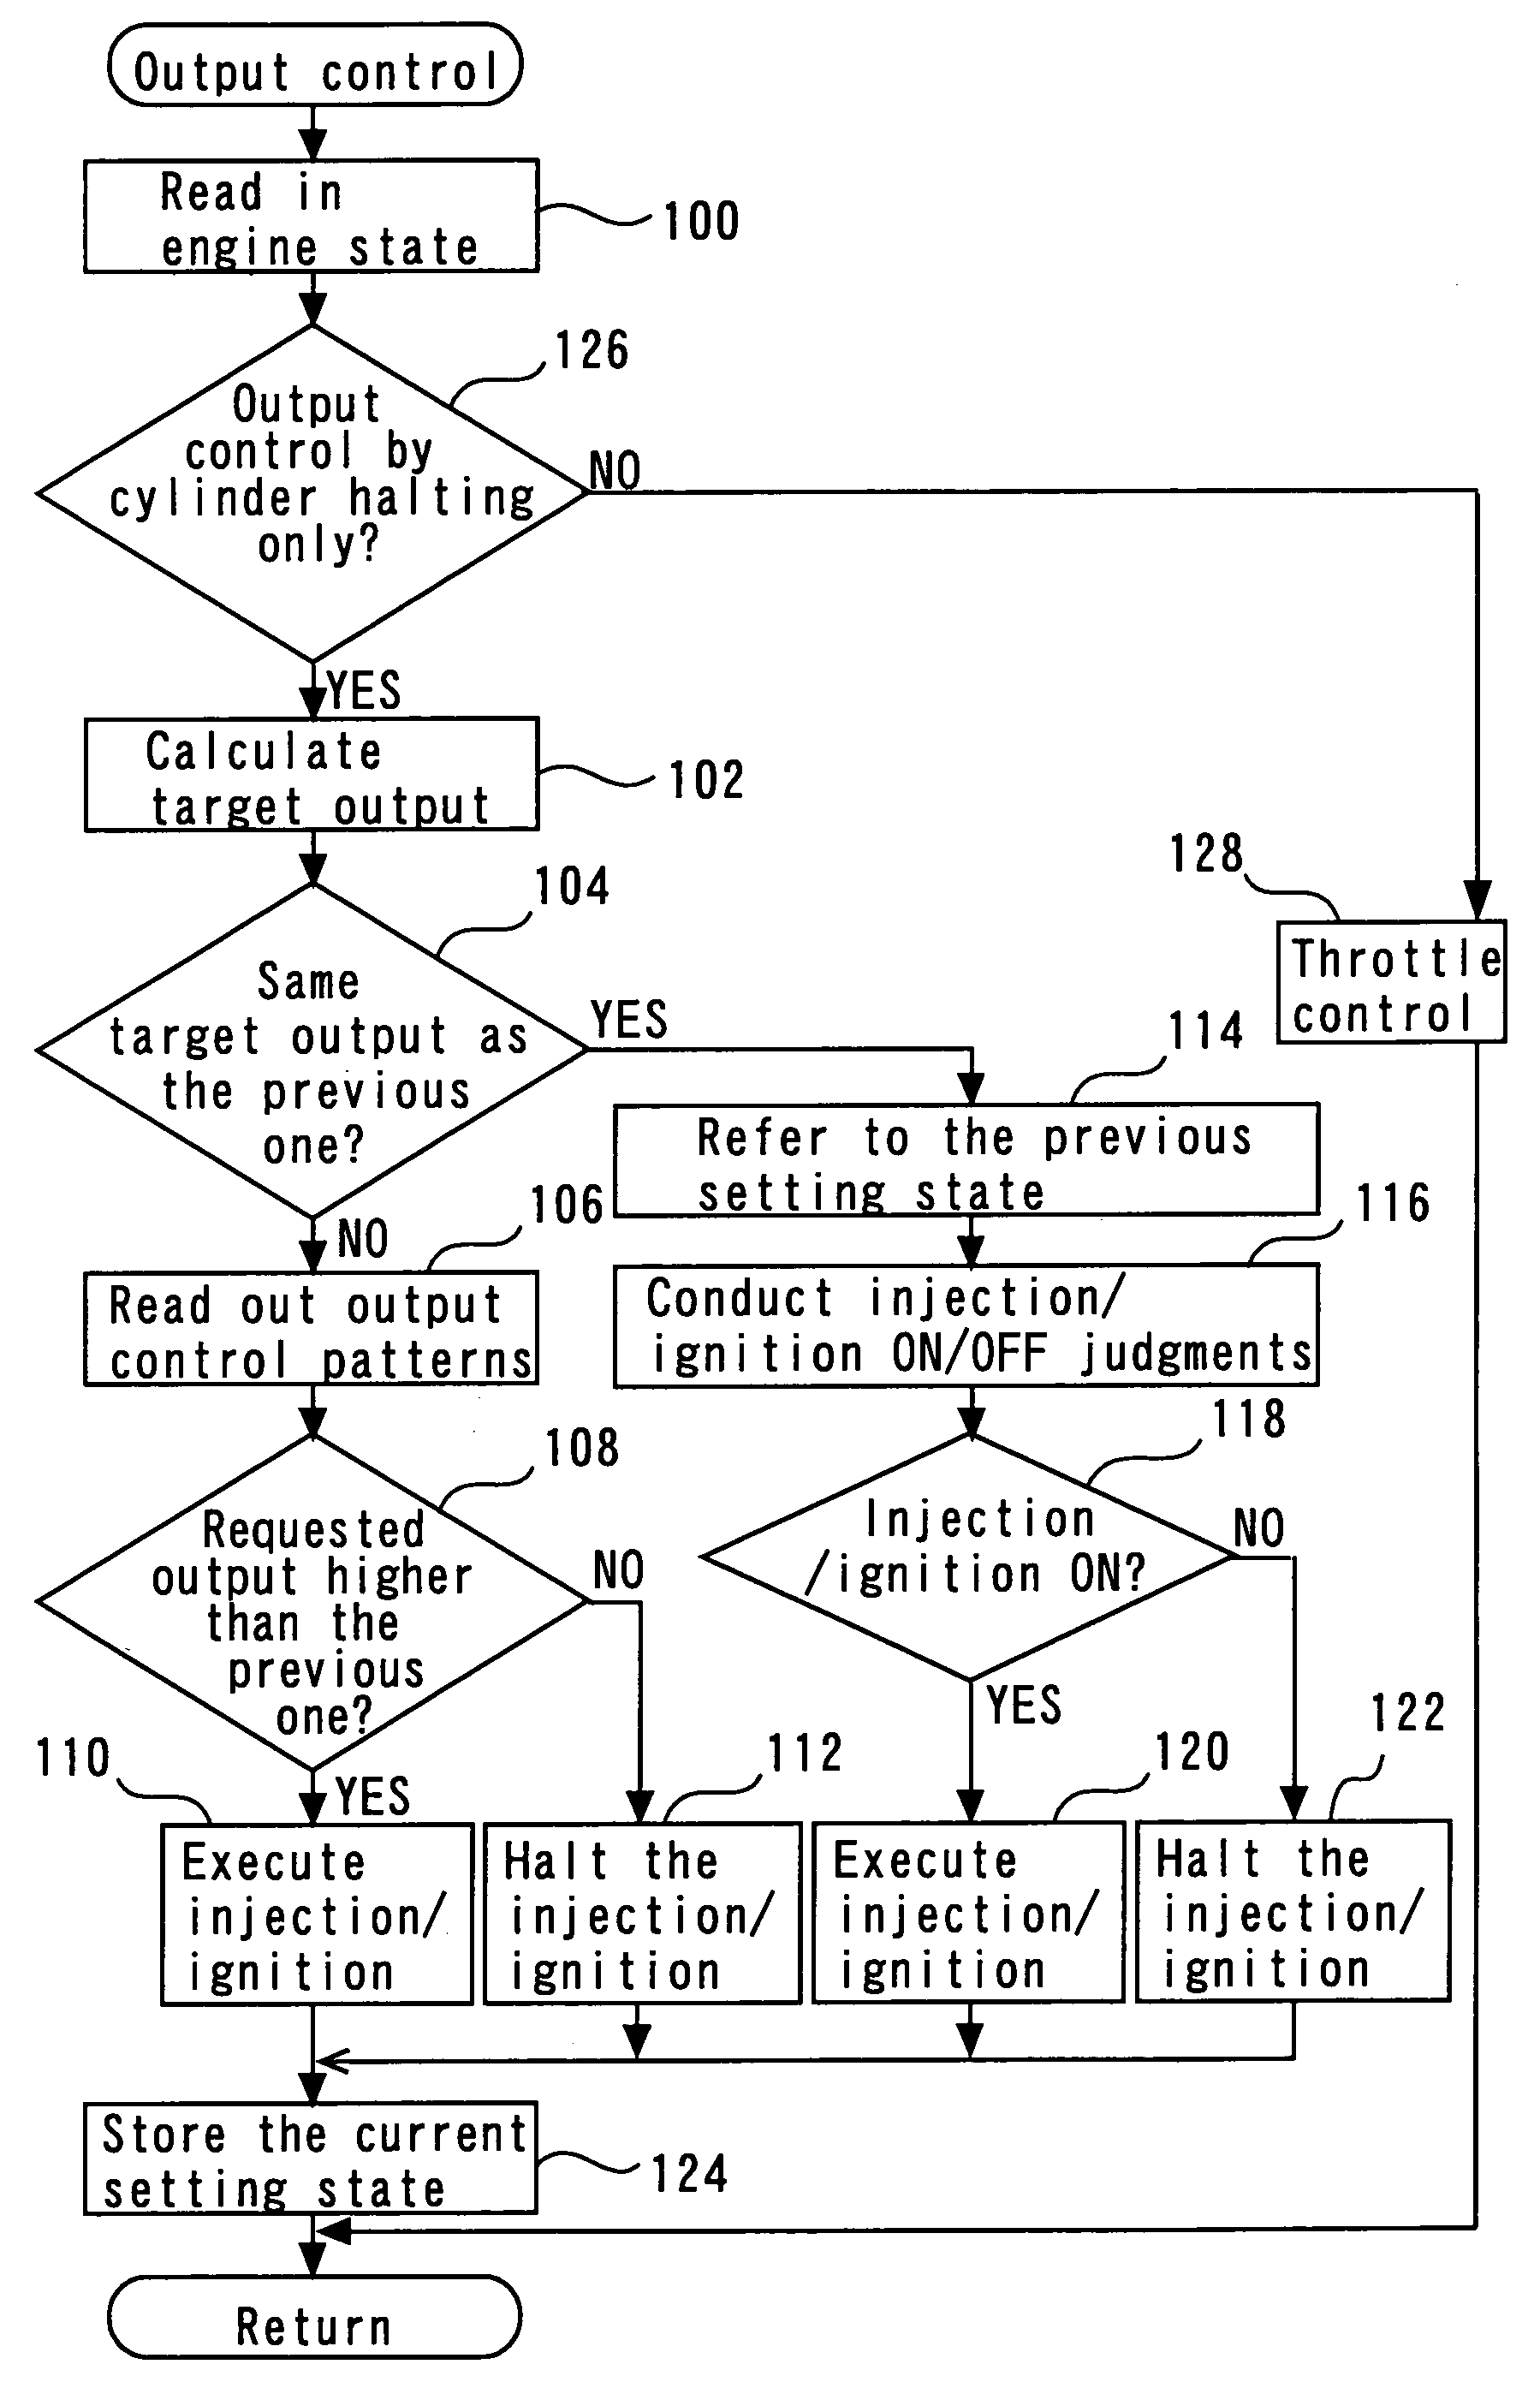 Output control system for internal combustion engine